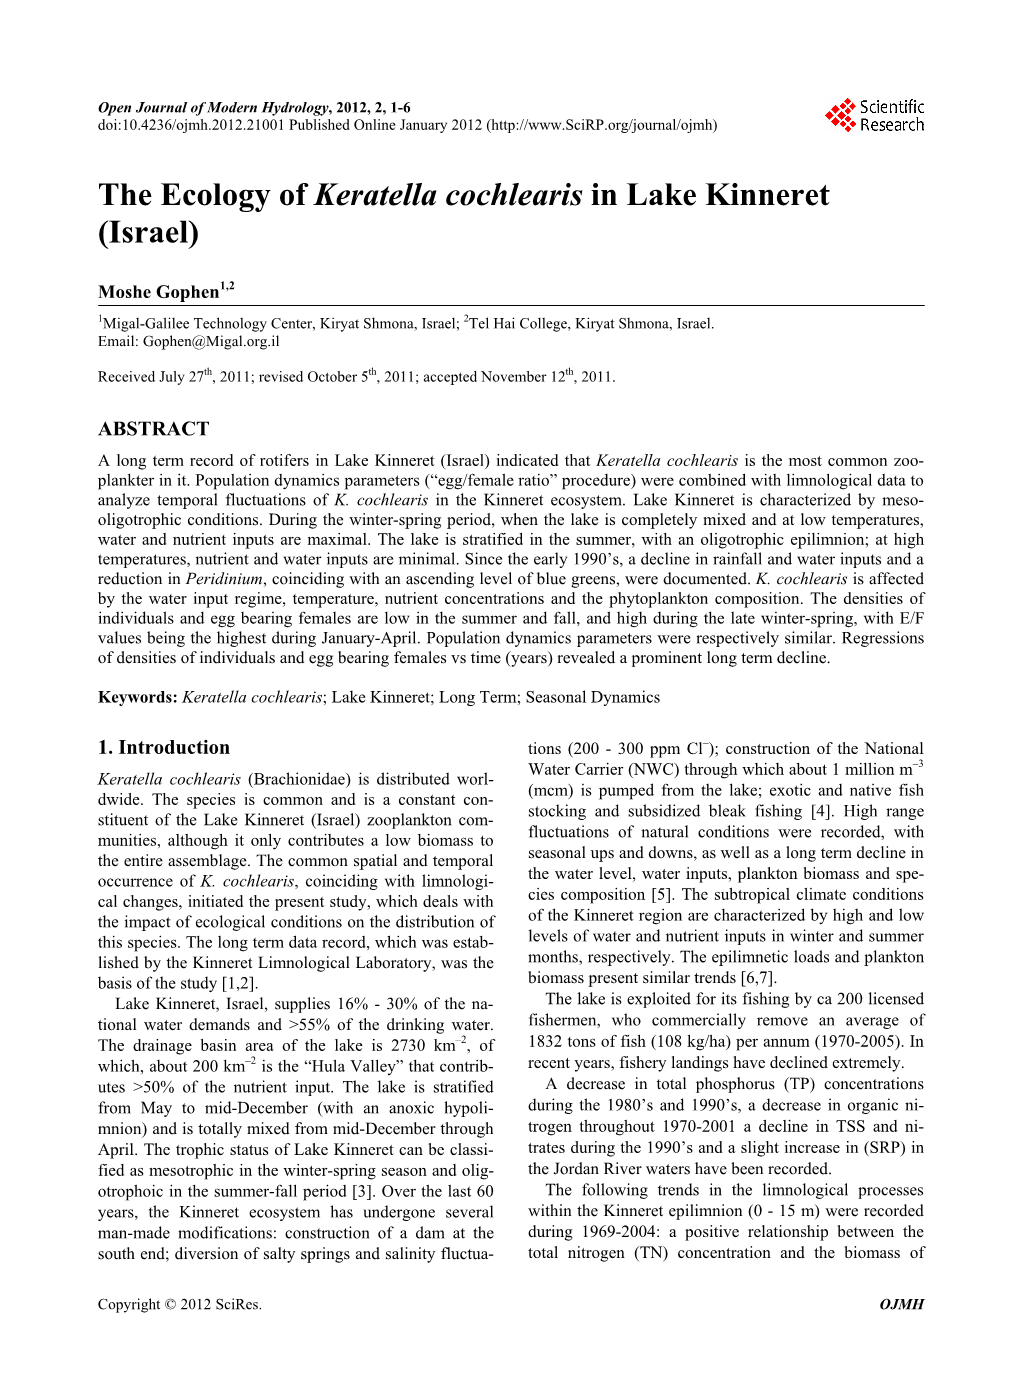 The Ecology of Keratella Cochlearis in Lake Kinneret (Israel)